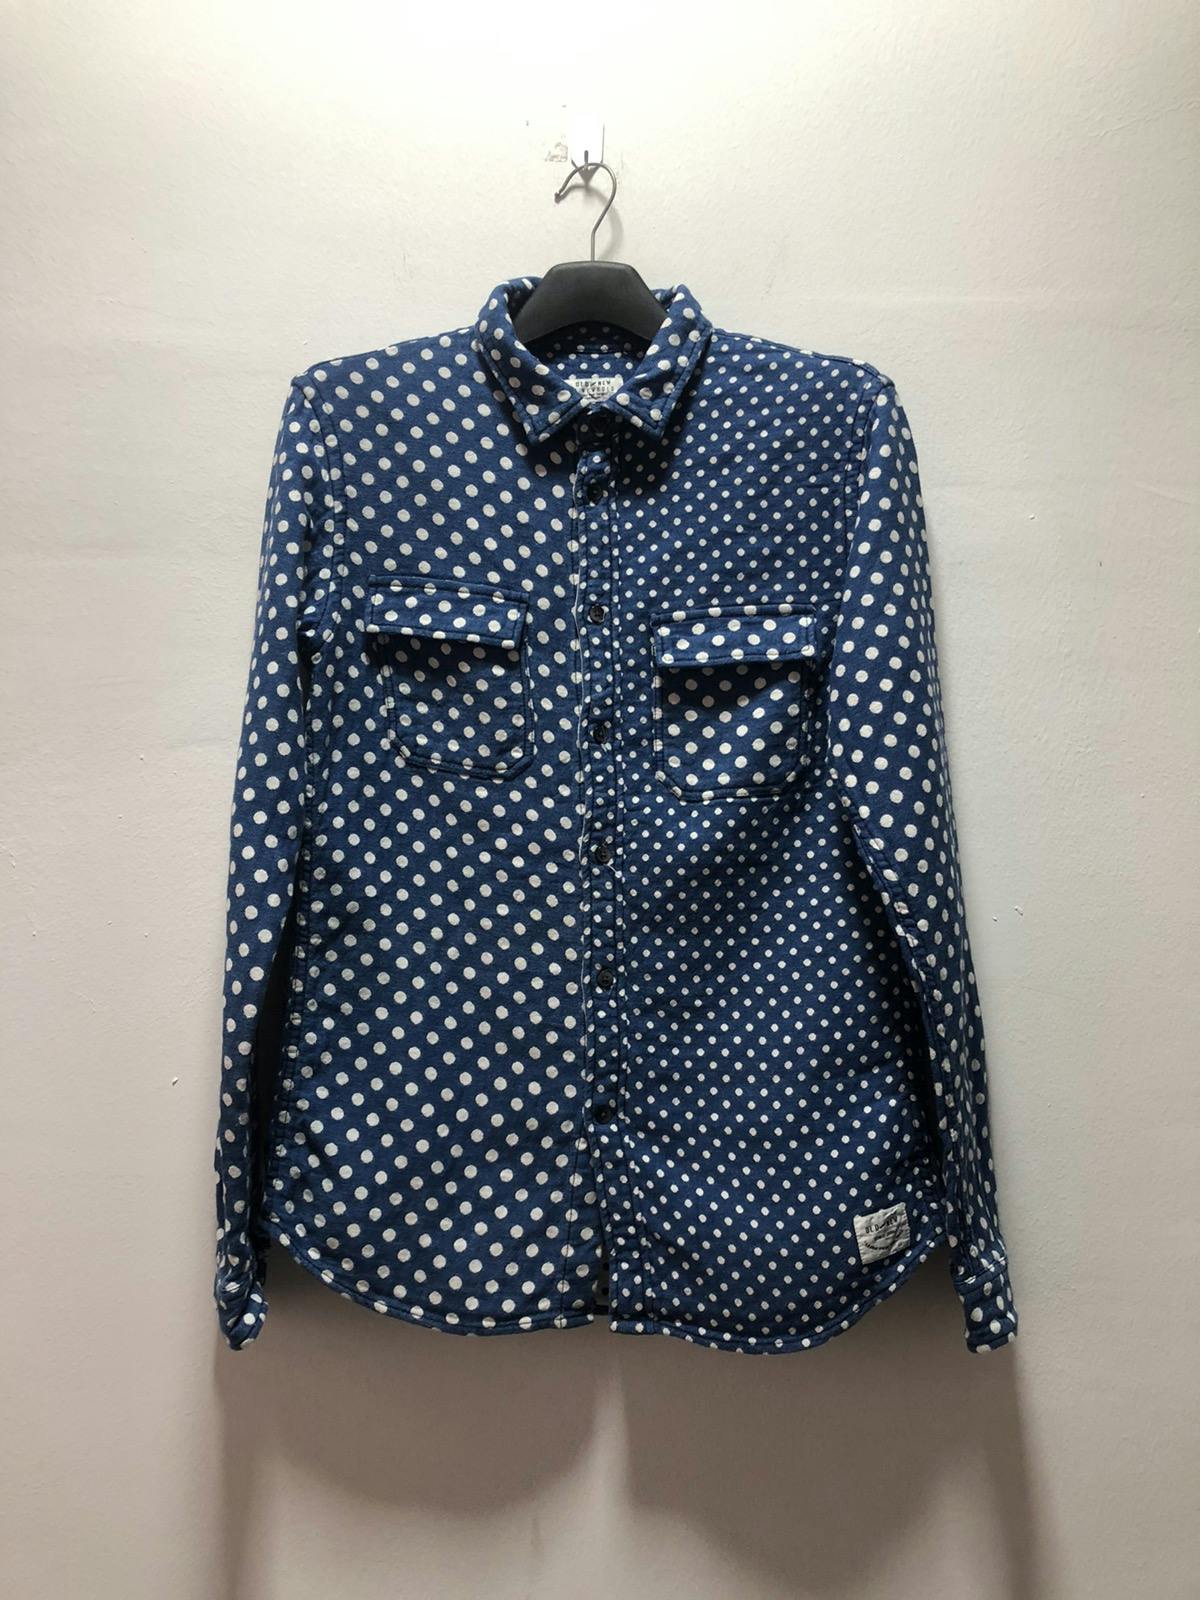 R NEWBOLD Shirt Flannel Japan Polka Dot Old And New - 1